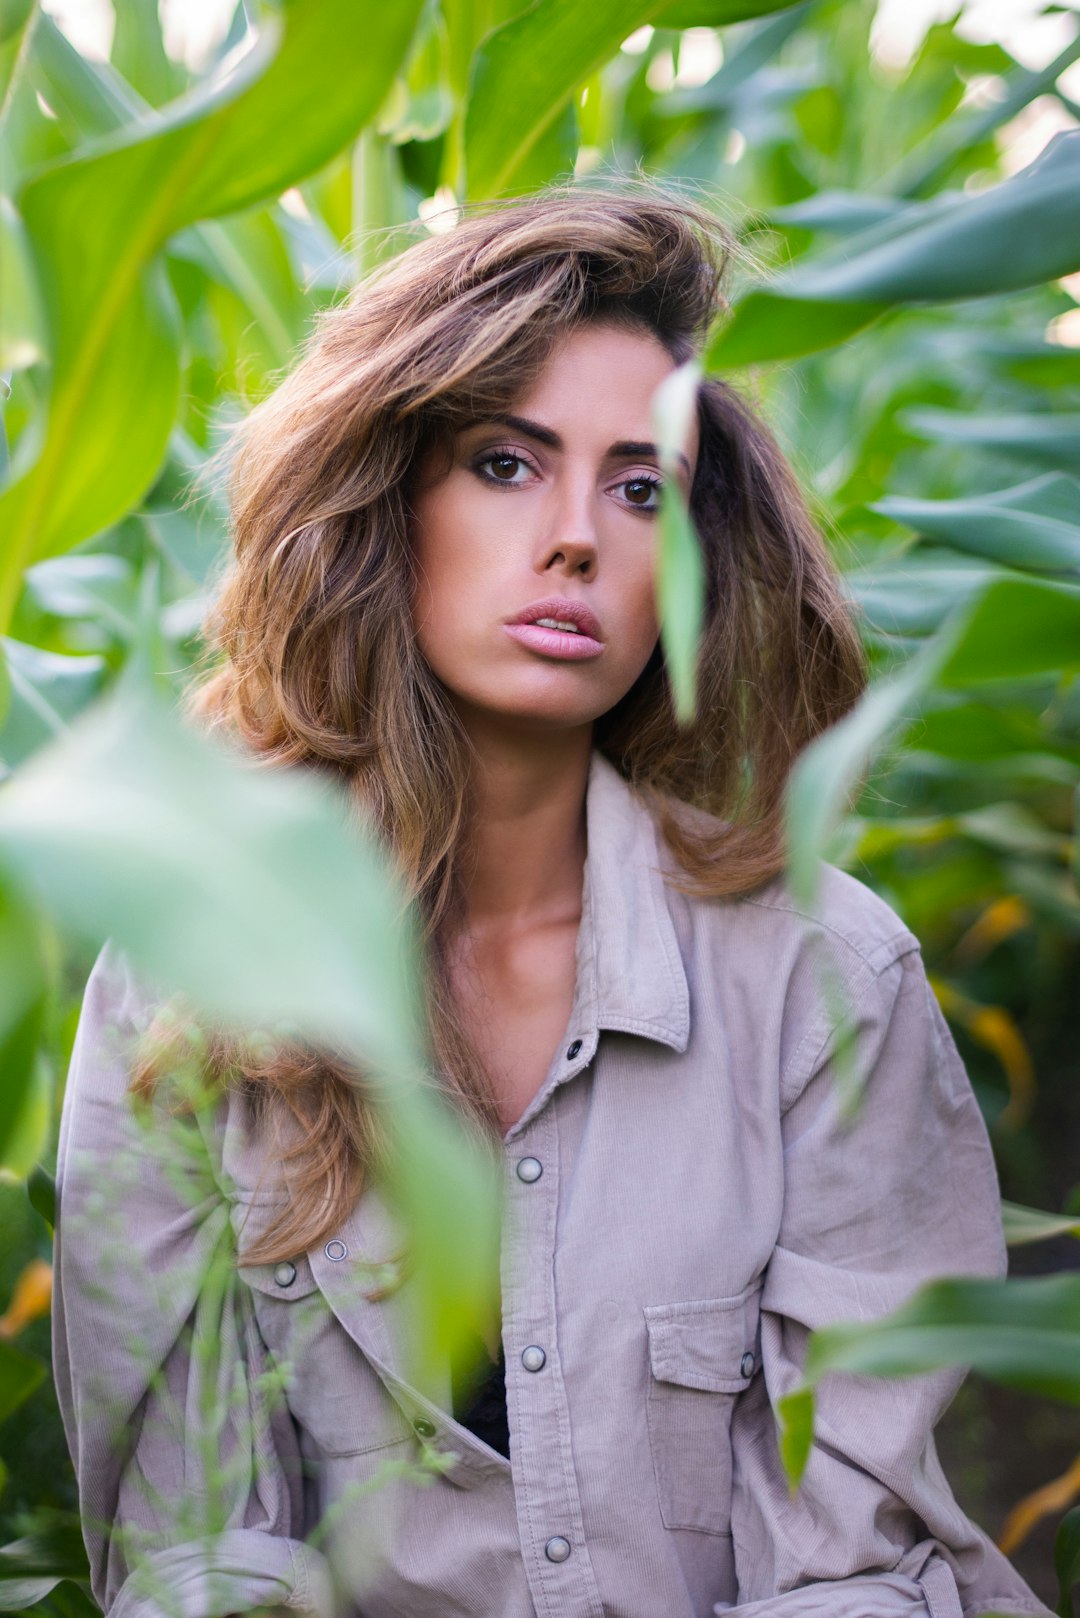 woman in gray button up shirt standing near green leaves